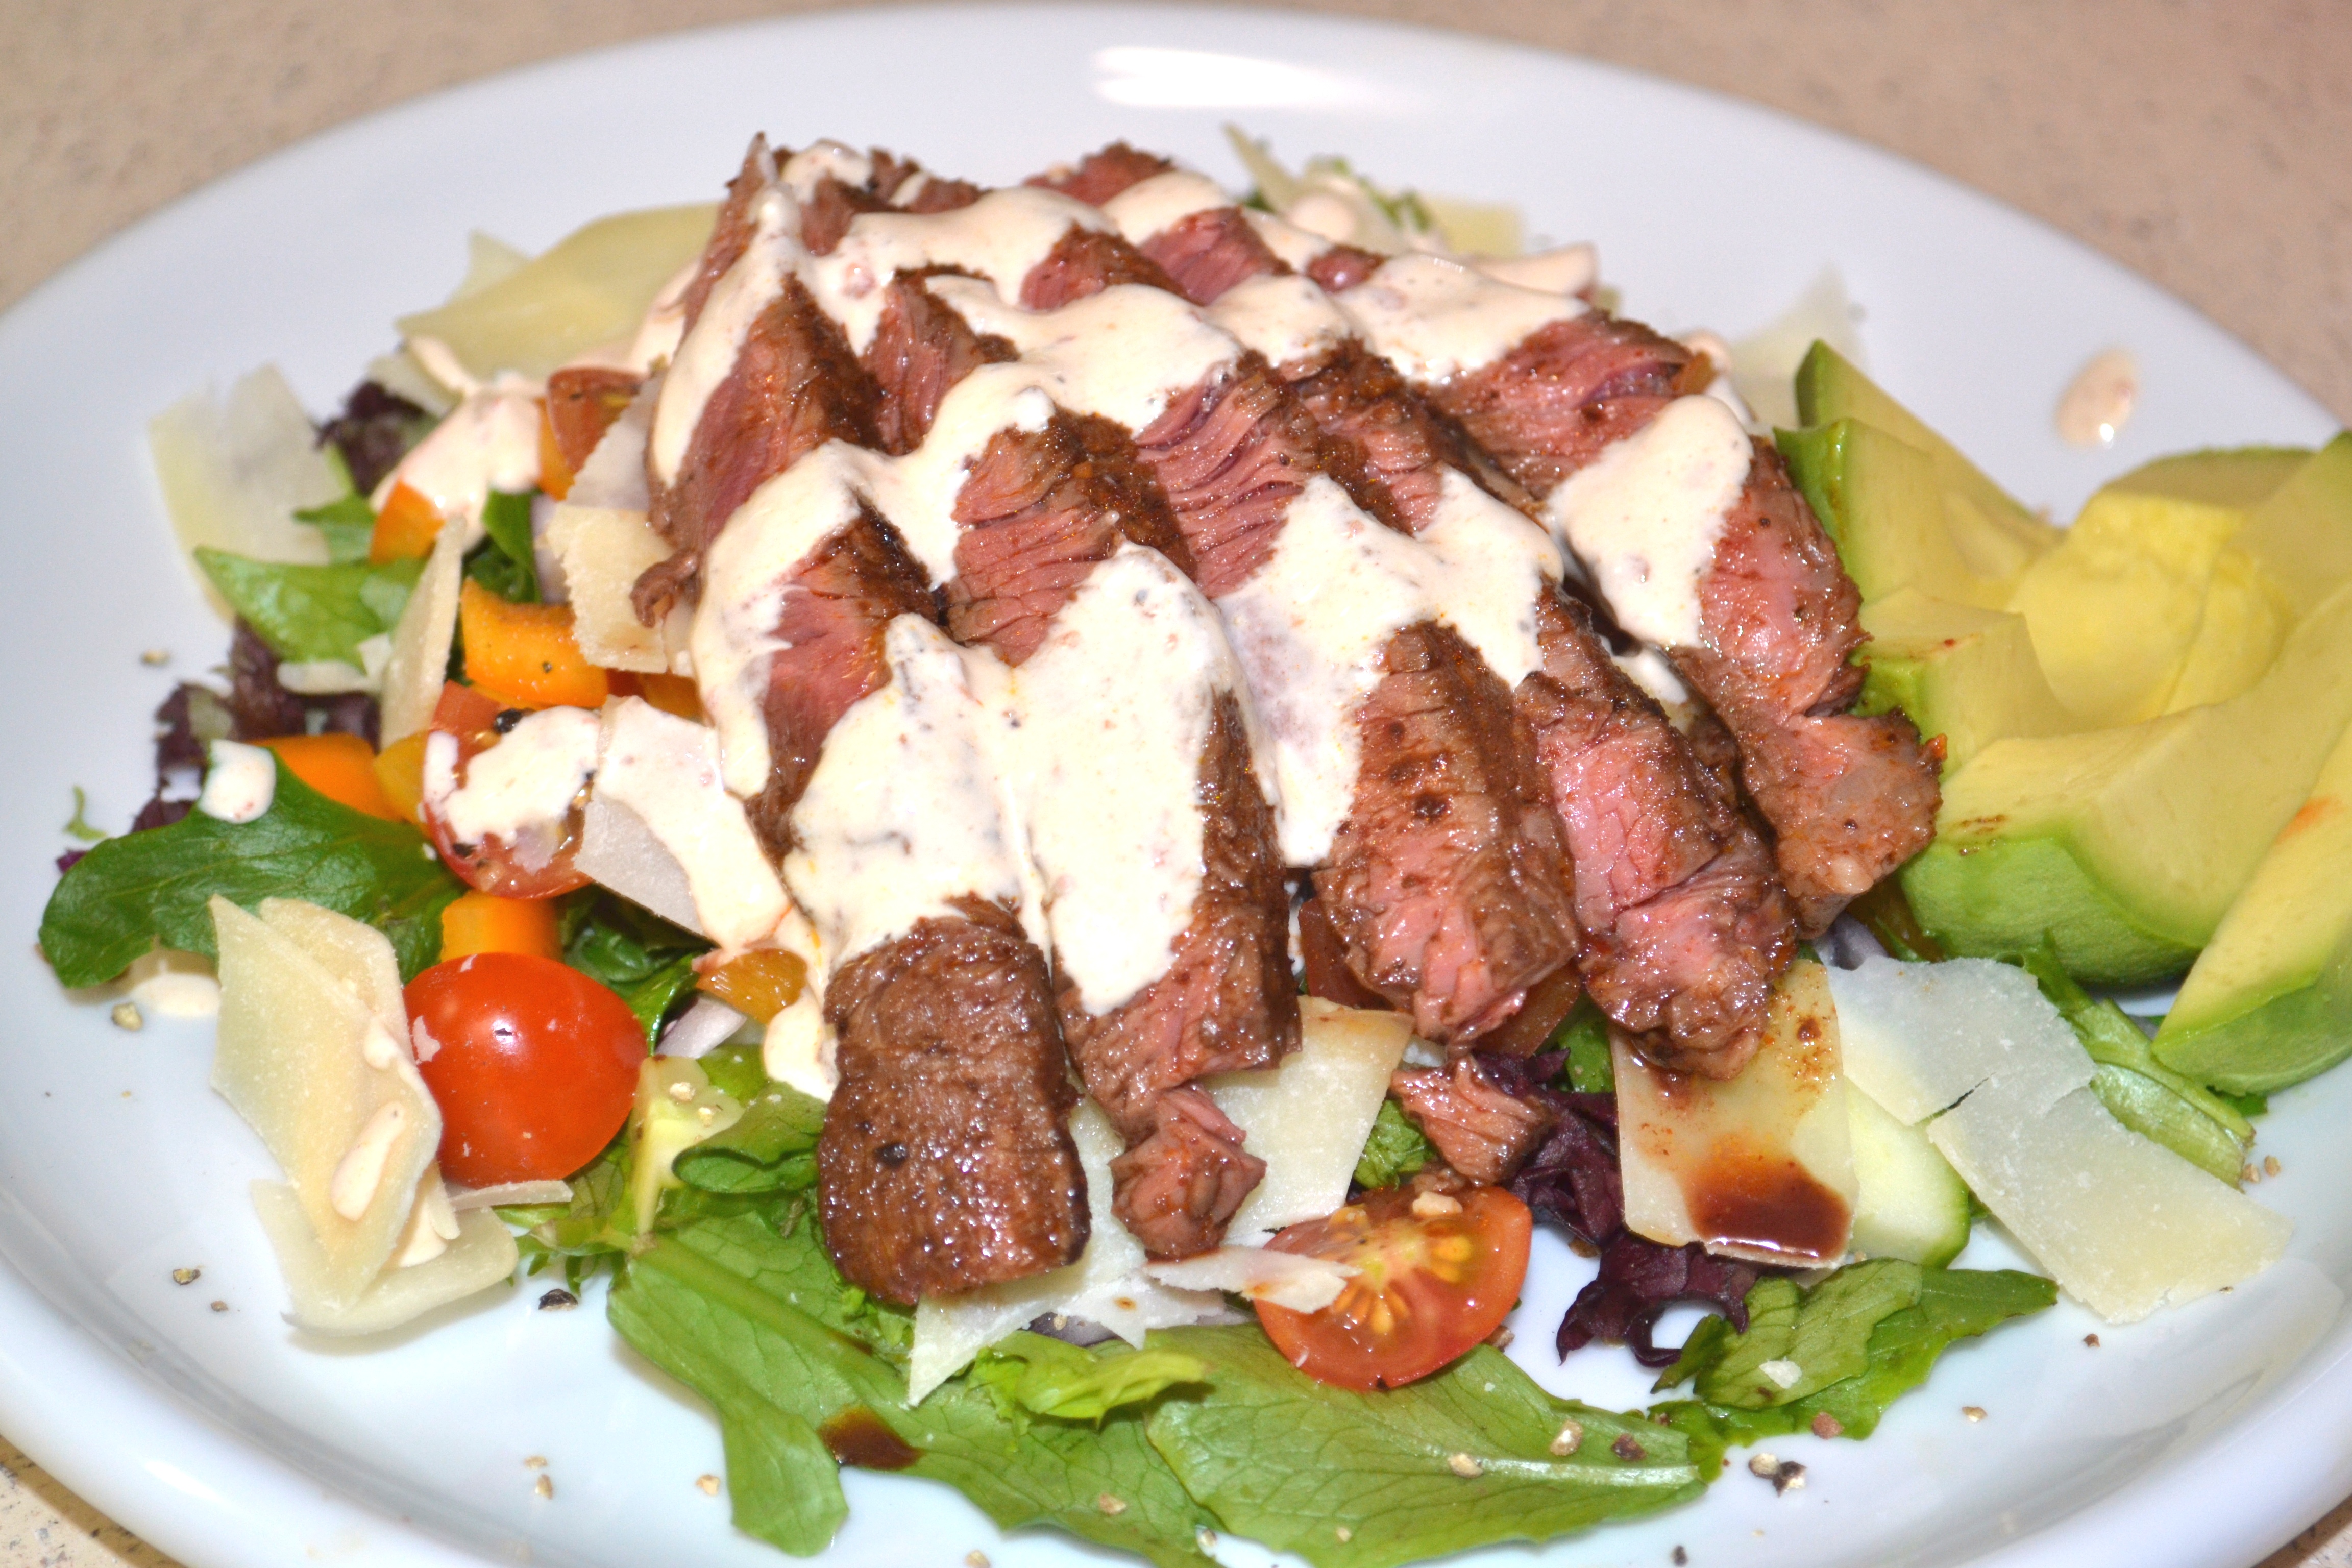 Cajun Rubbed Steak Salad with Creamy Chipotle-Cider Dressing